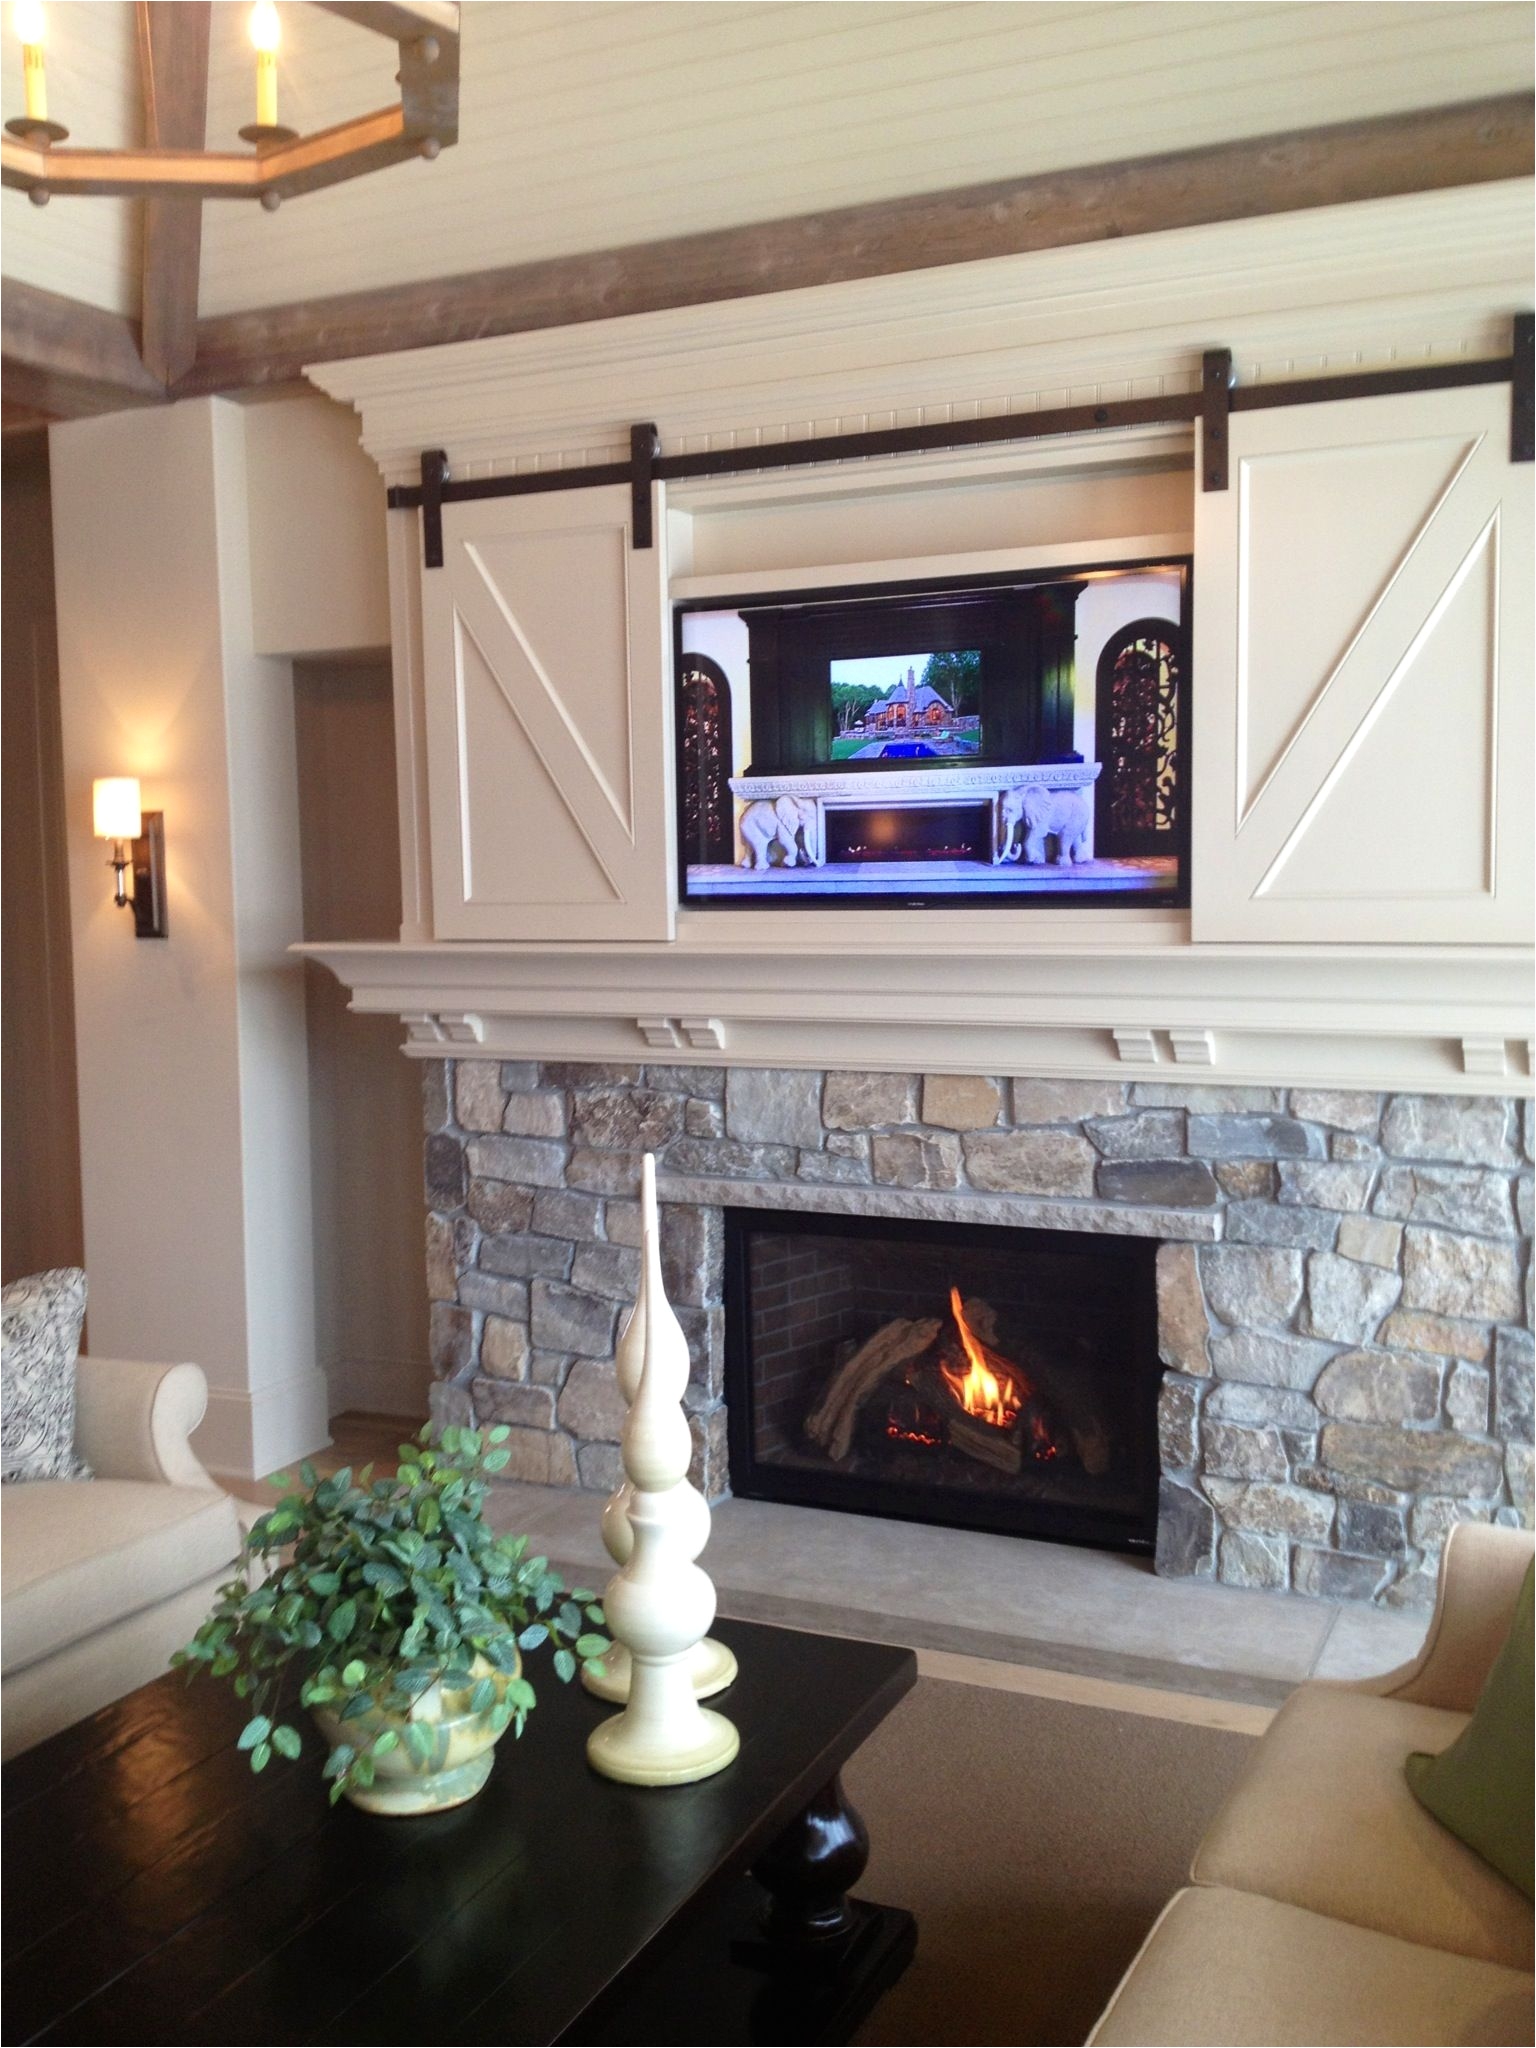 Diy Water Vapor Fireplace Awesome How Does A Water Vapor Fireplace Work